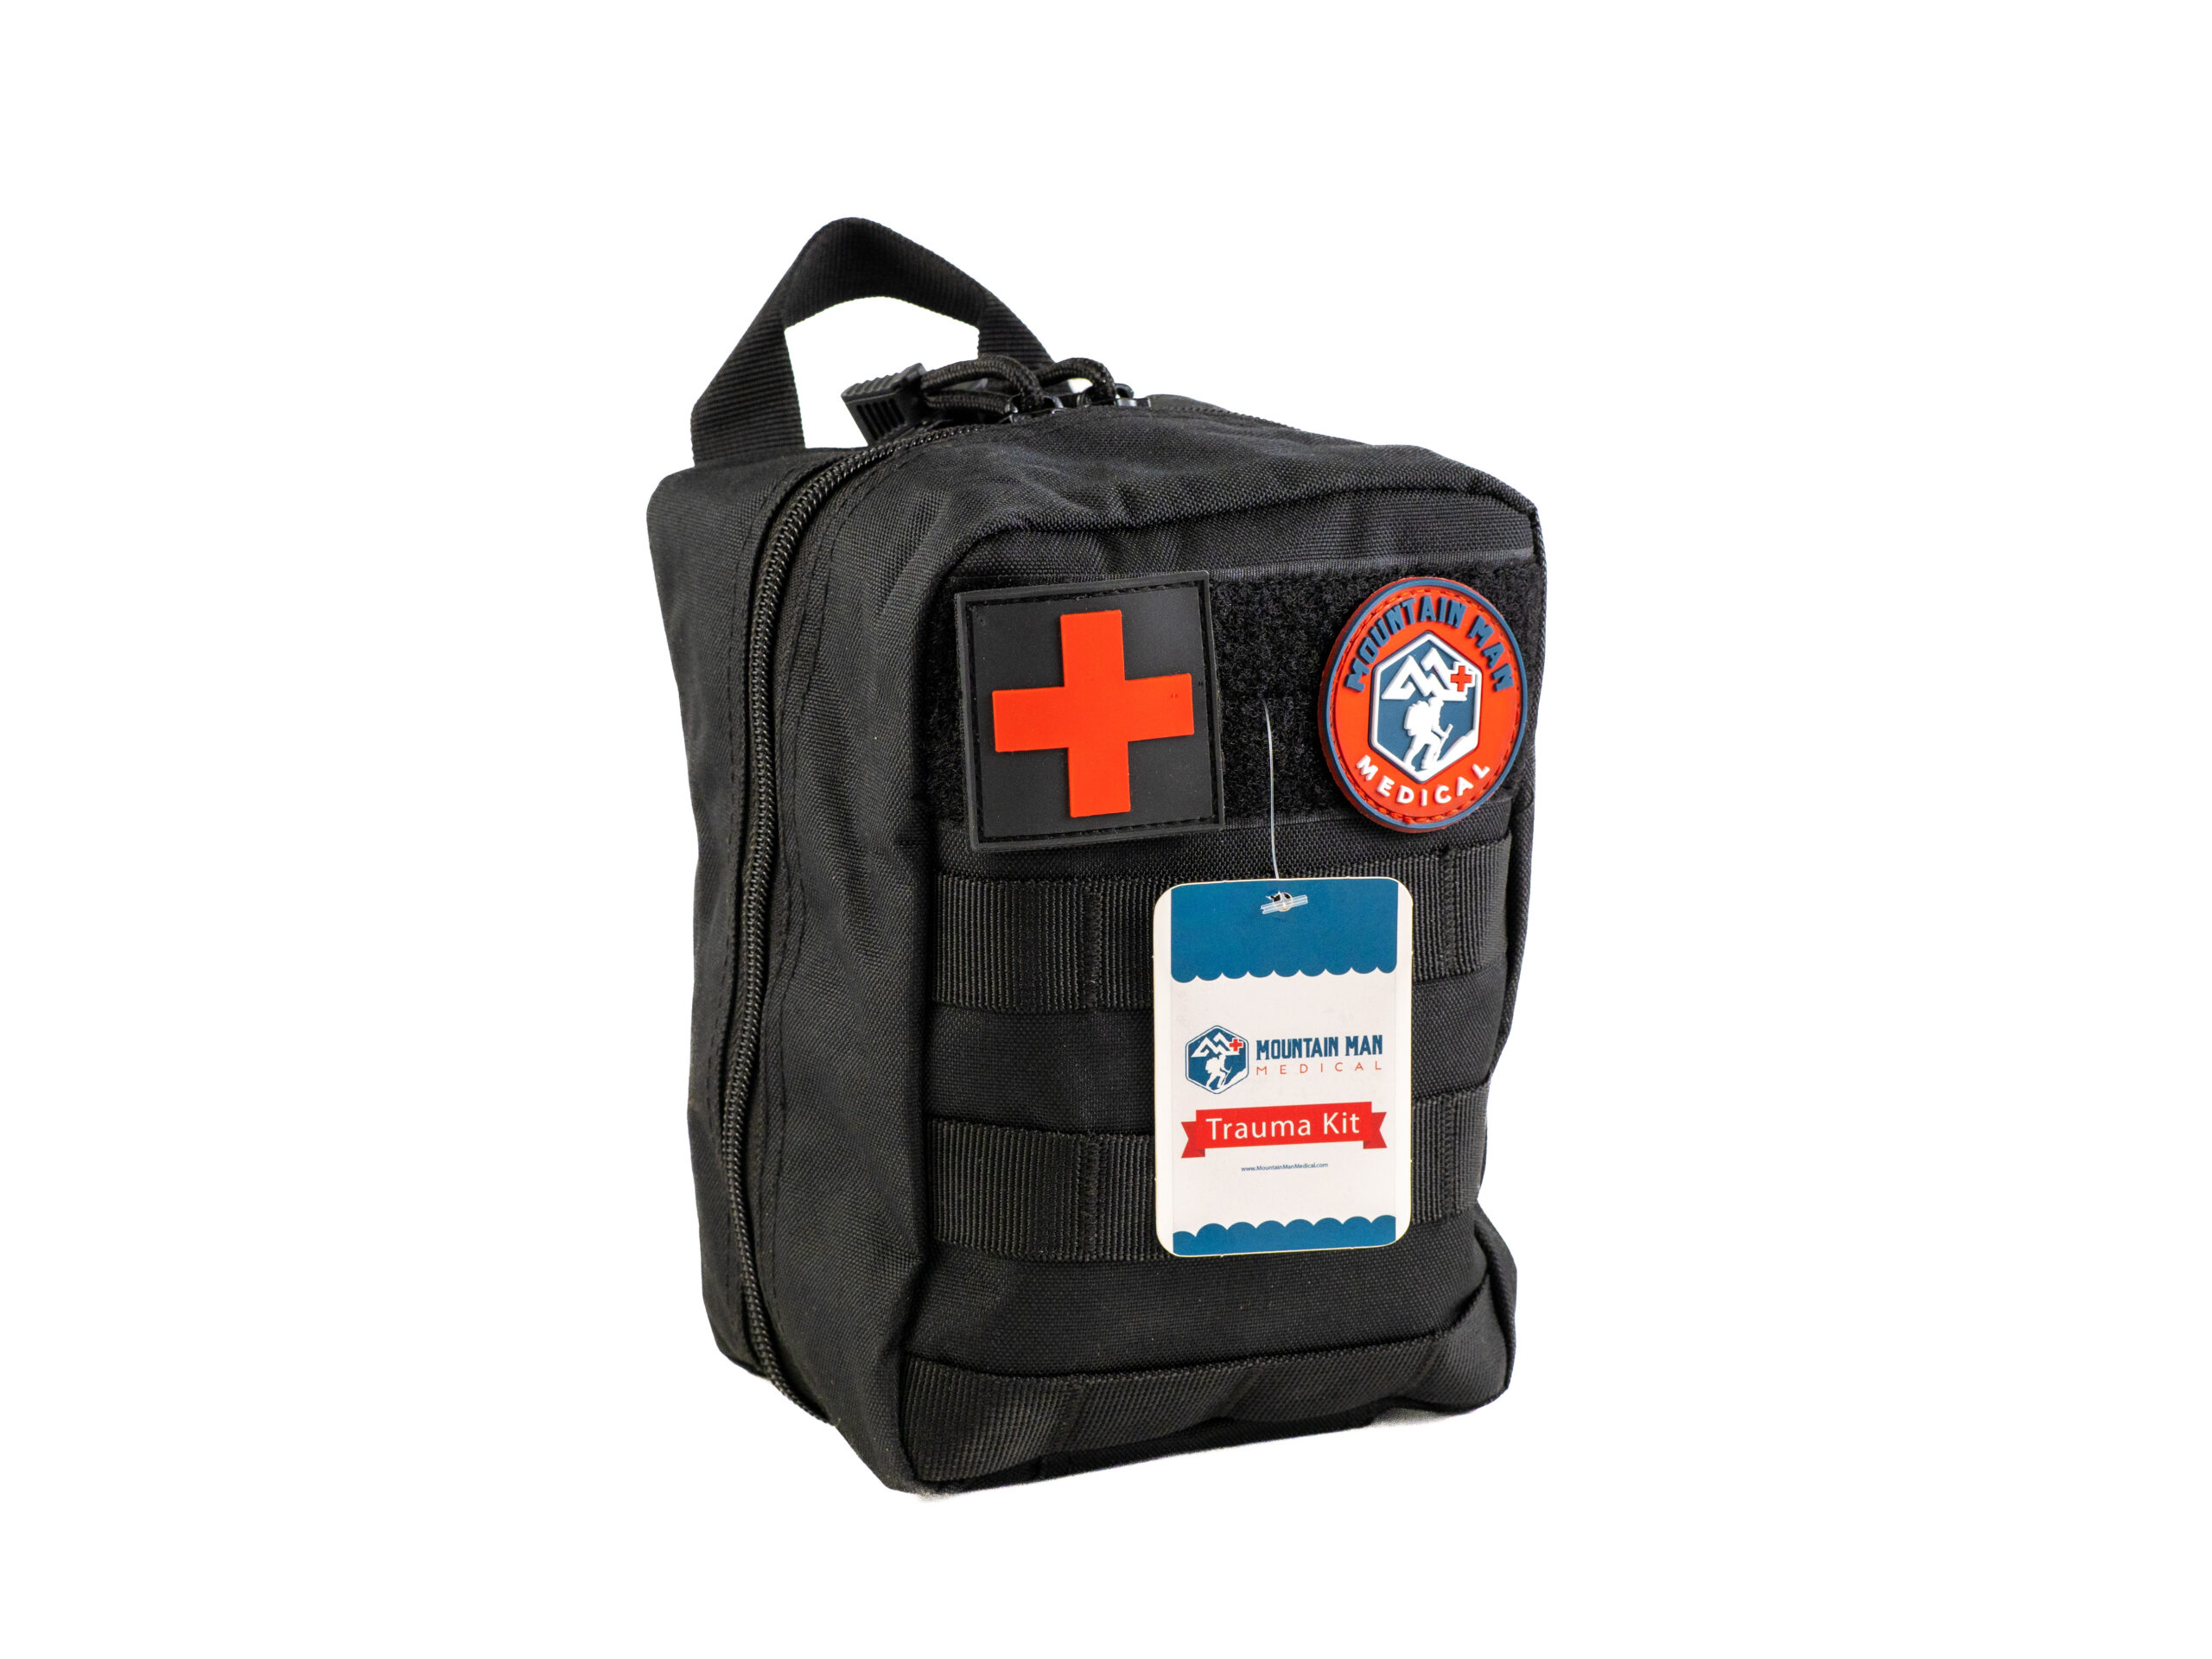 Israeli First Aid Velcro Patch - Israeli First Aid